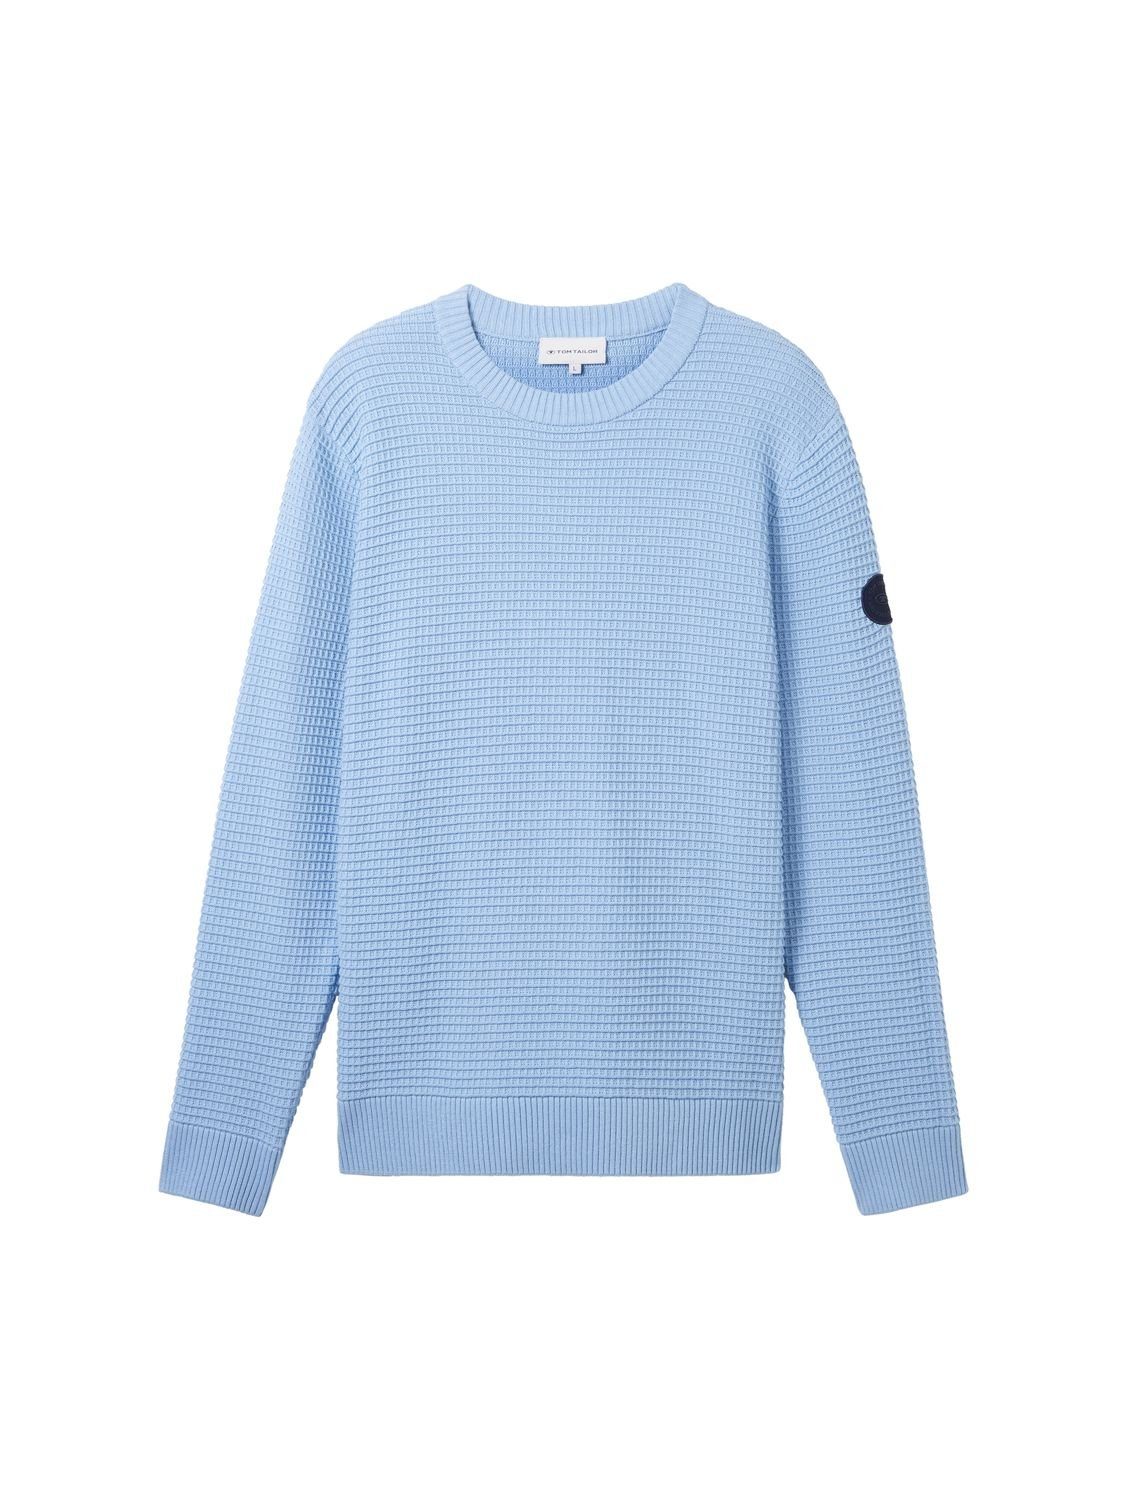 STRUCTURED Washed Baumwolle CREWNECK aus TOM KNIT 32245 Middle TAILOR Strickpullover Out Blue